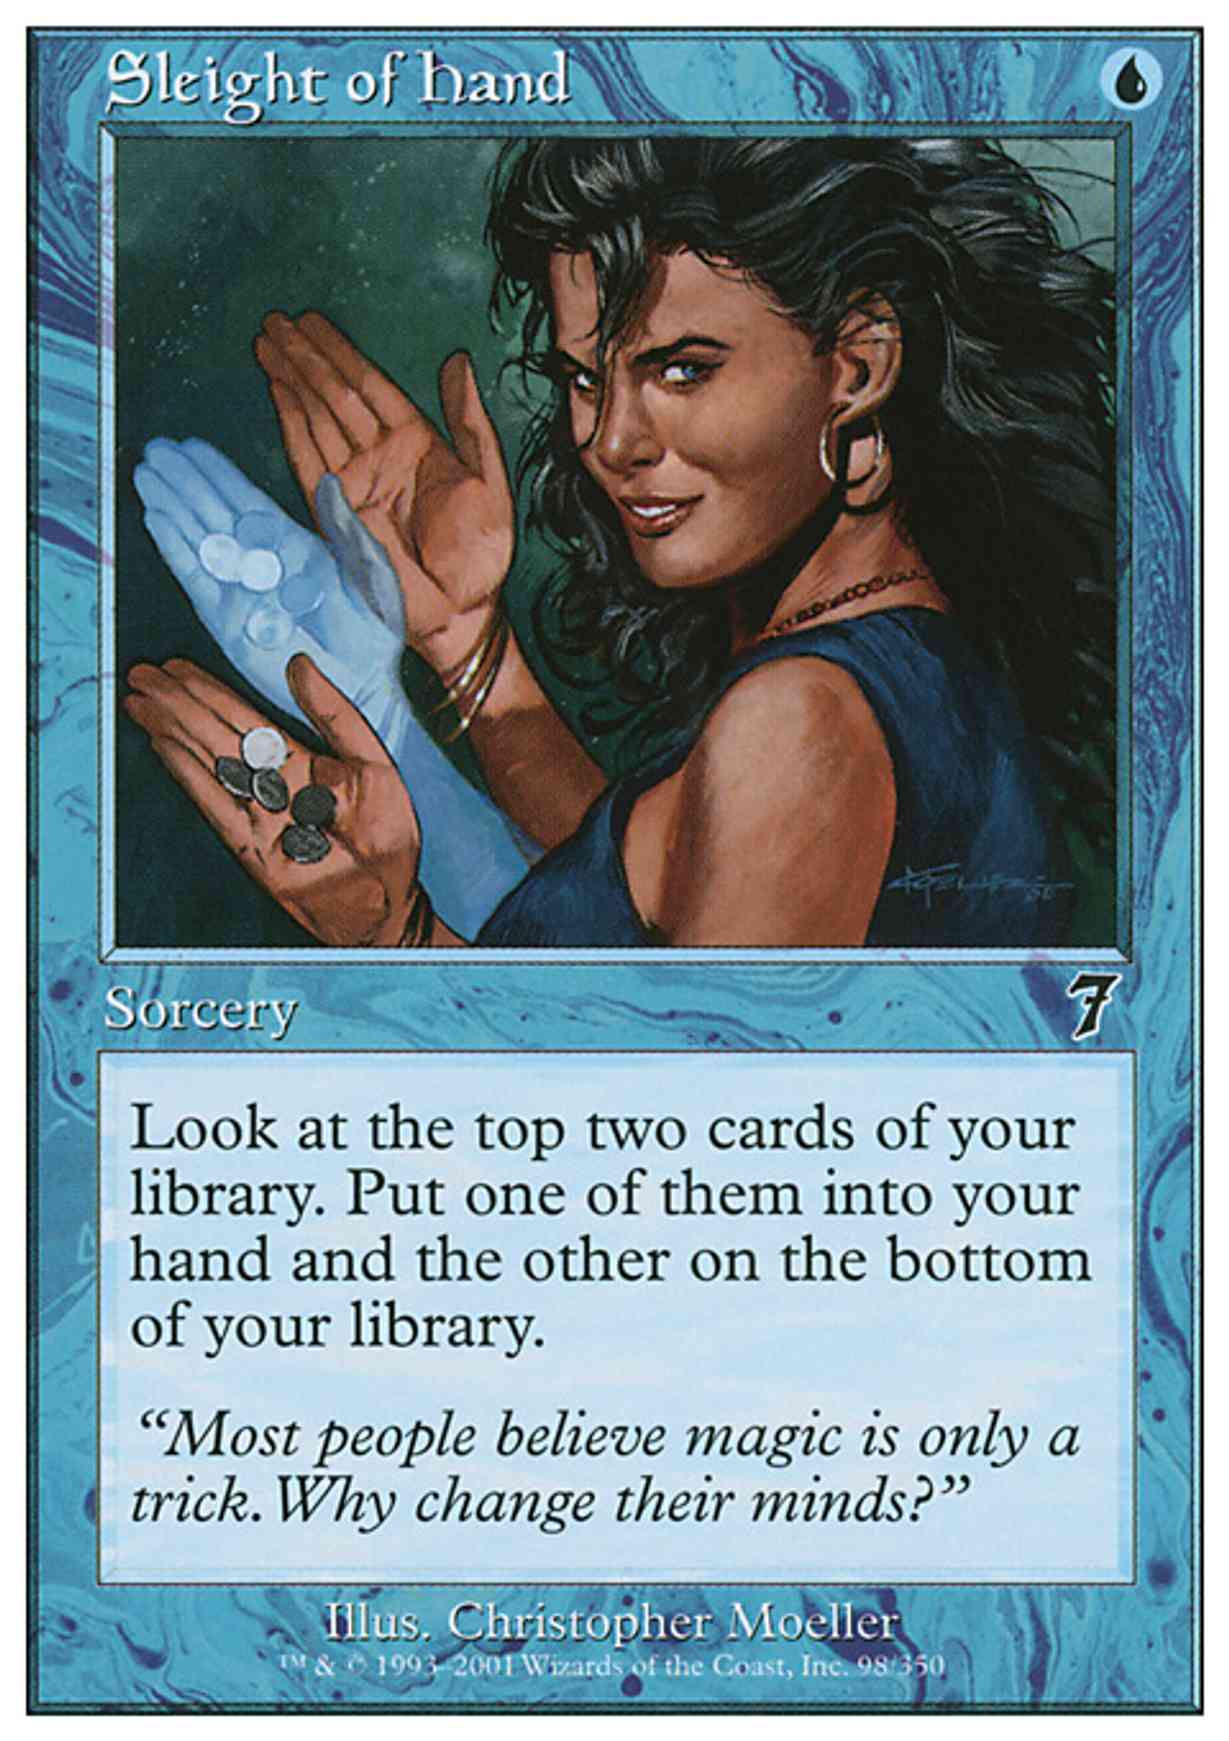 Sleight of Hand magic card front